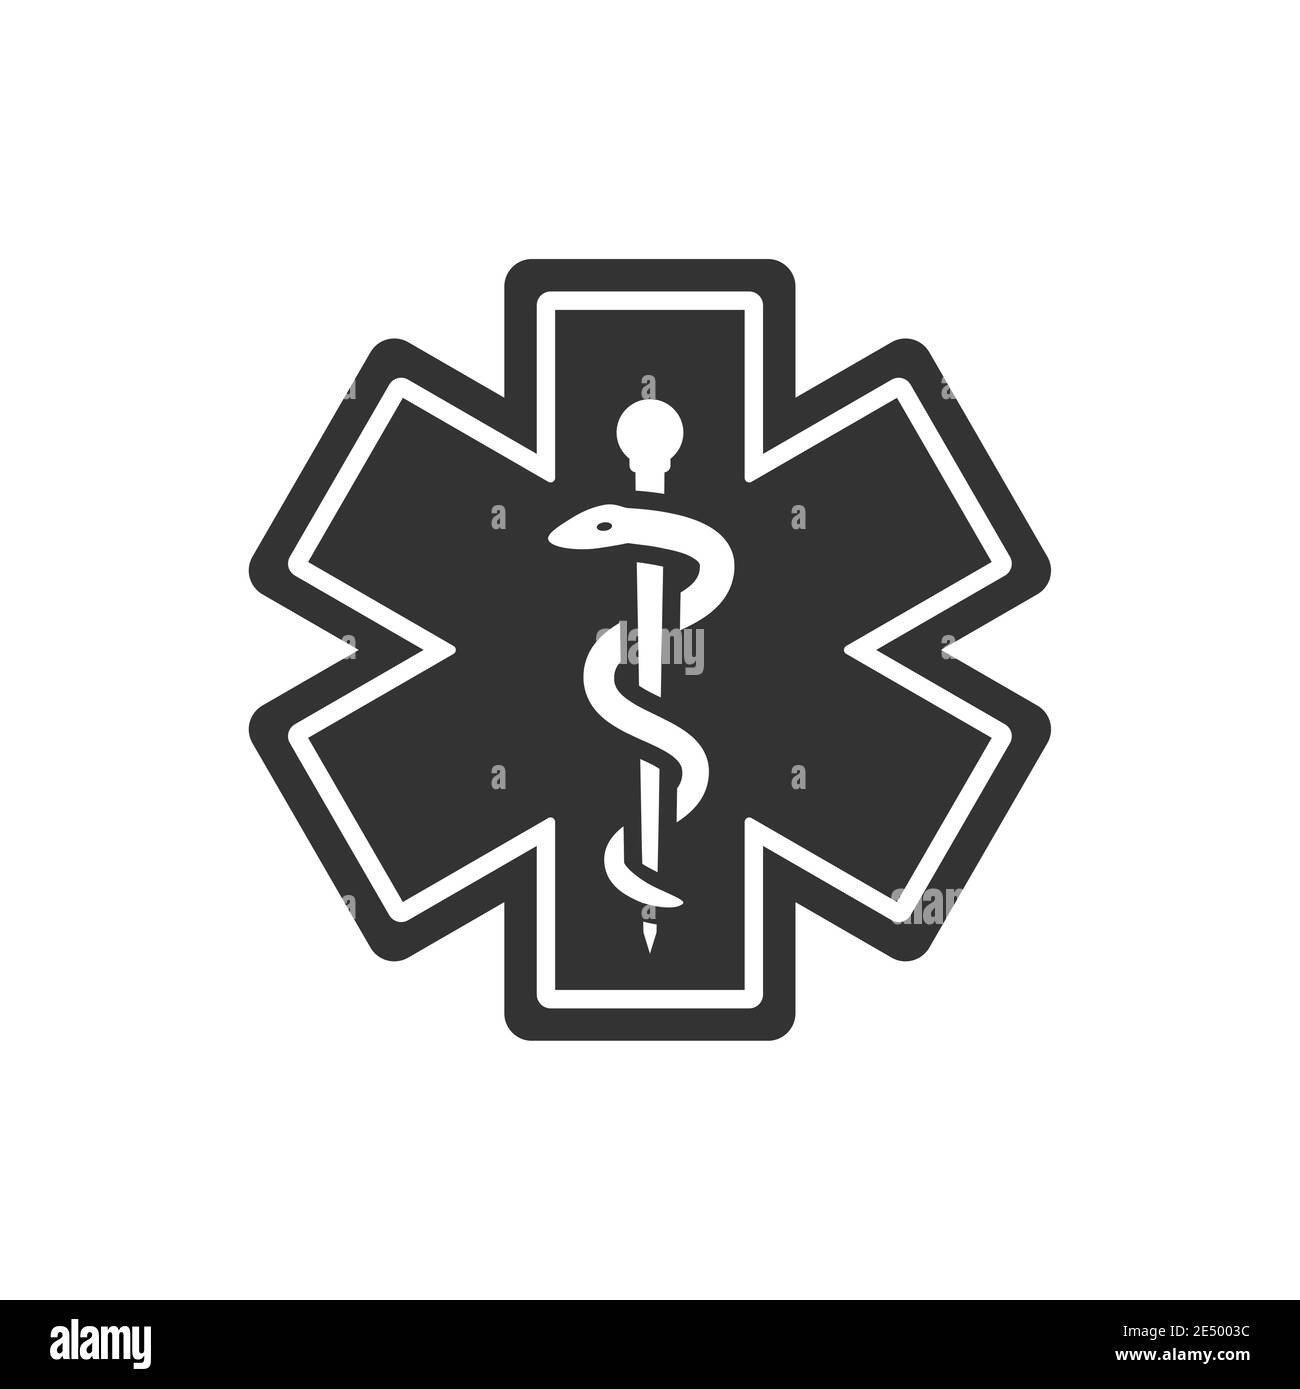 First aid, medical emergency vector symbol. Rod of asclepius or aesculapius with snake, ems icon. Stock Vector